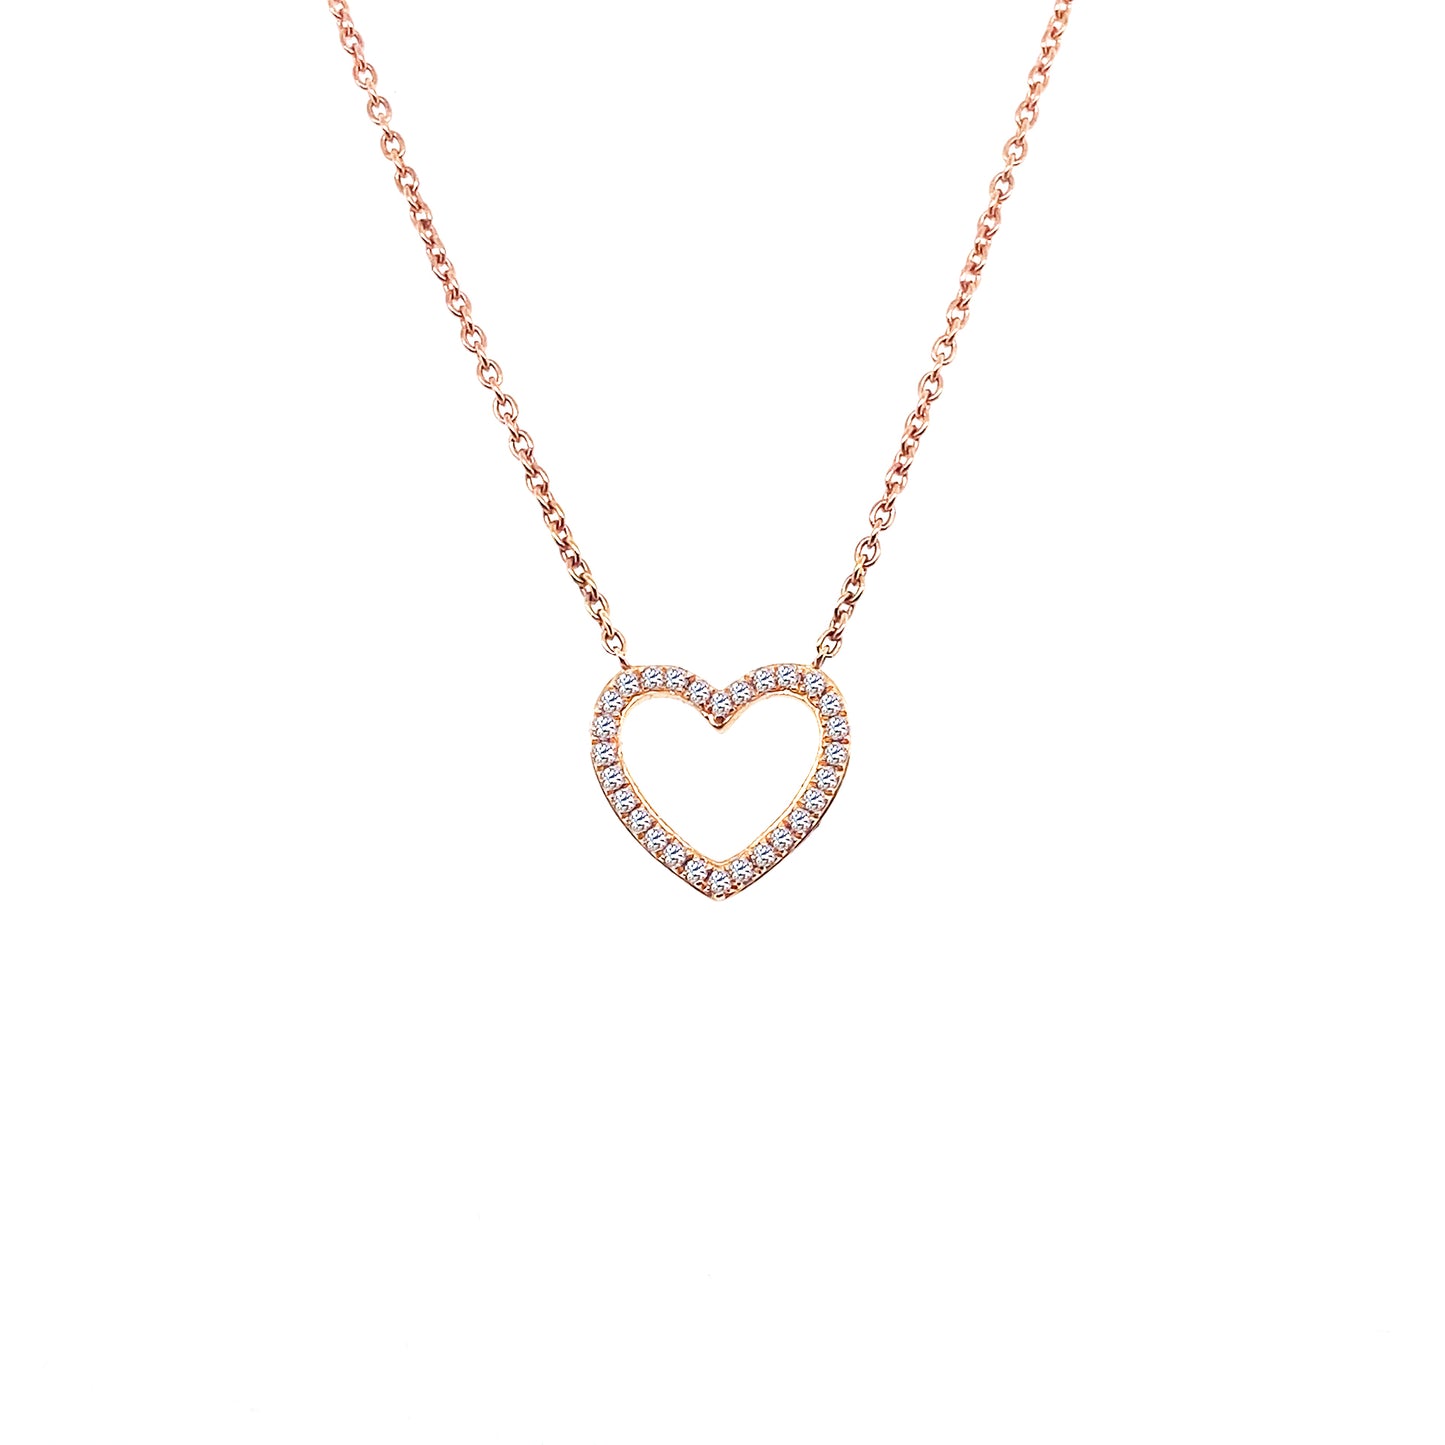 18ct Rose Gold Diamond Heart Necklace